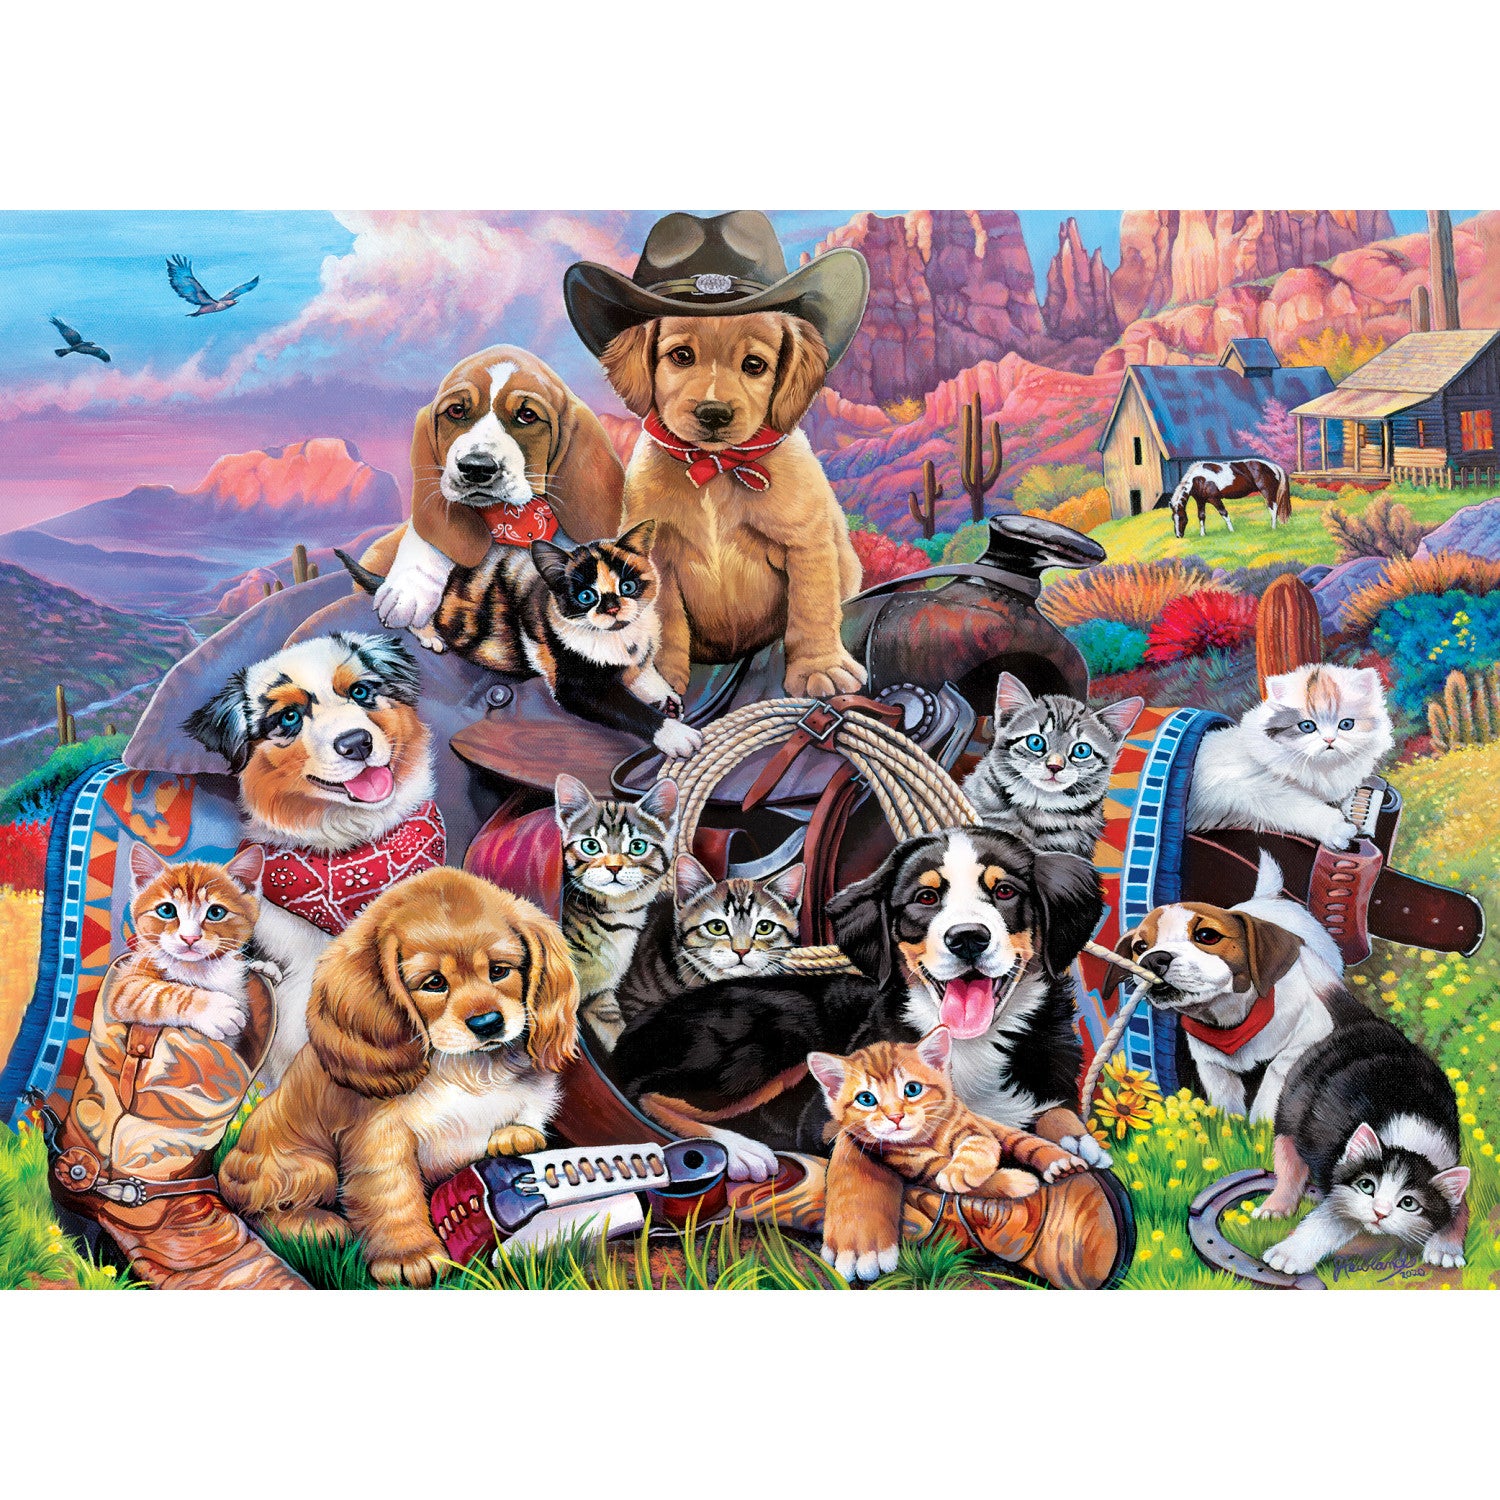 Furry Friends - Cowboys at Work 1000 Piece Puzzle